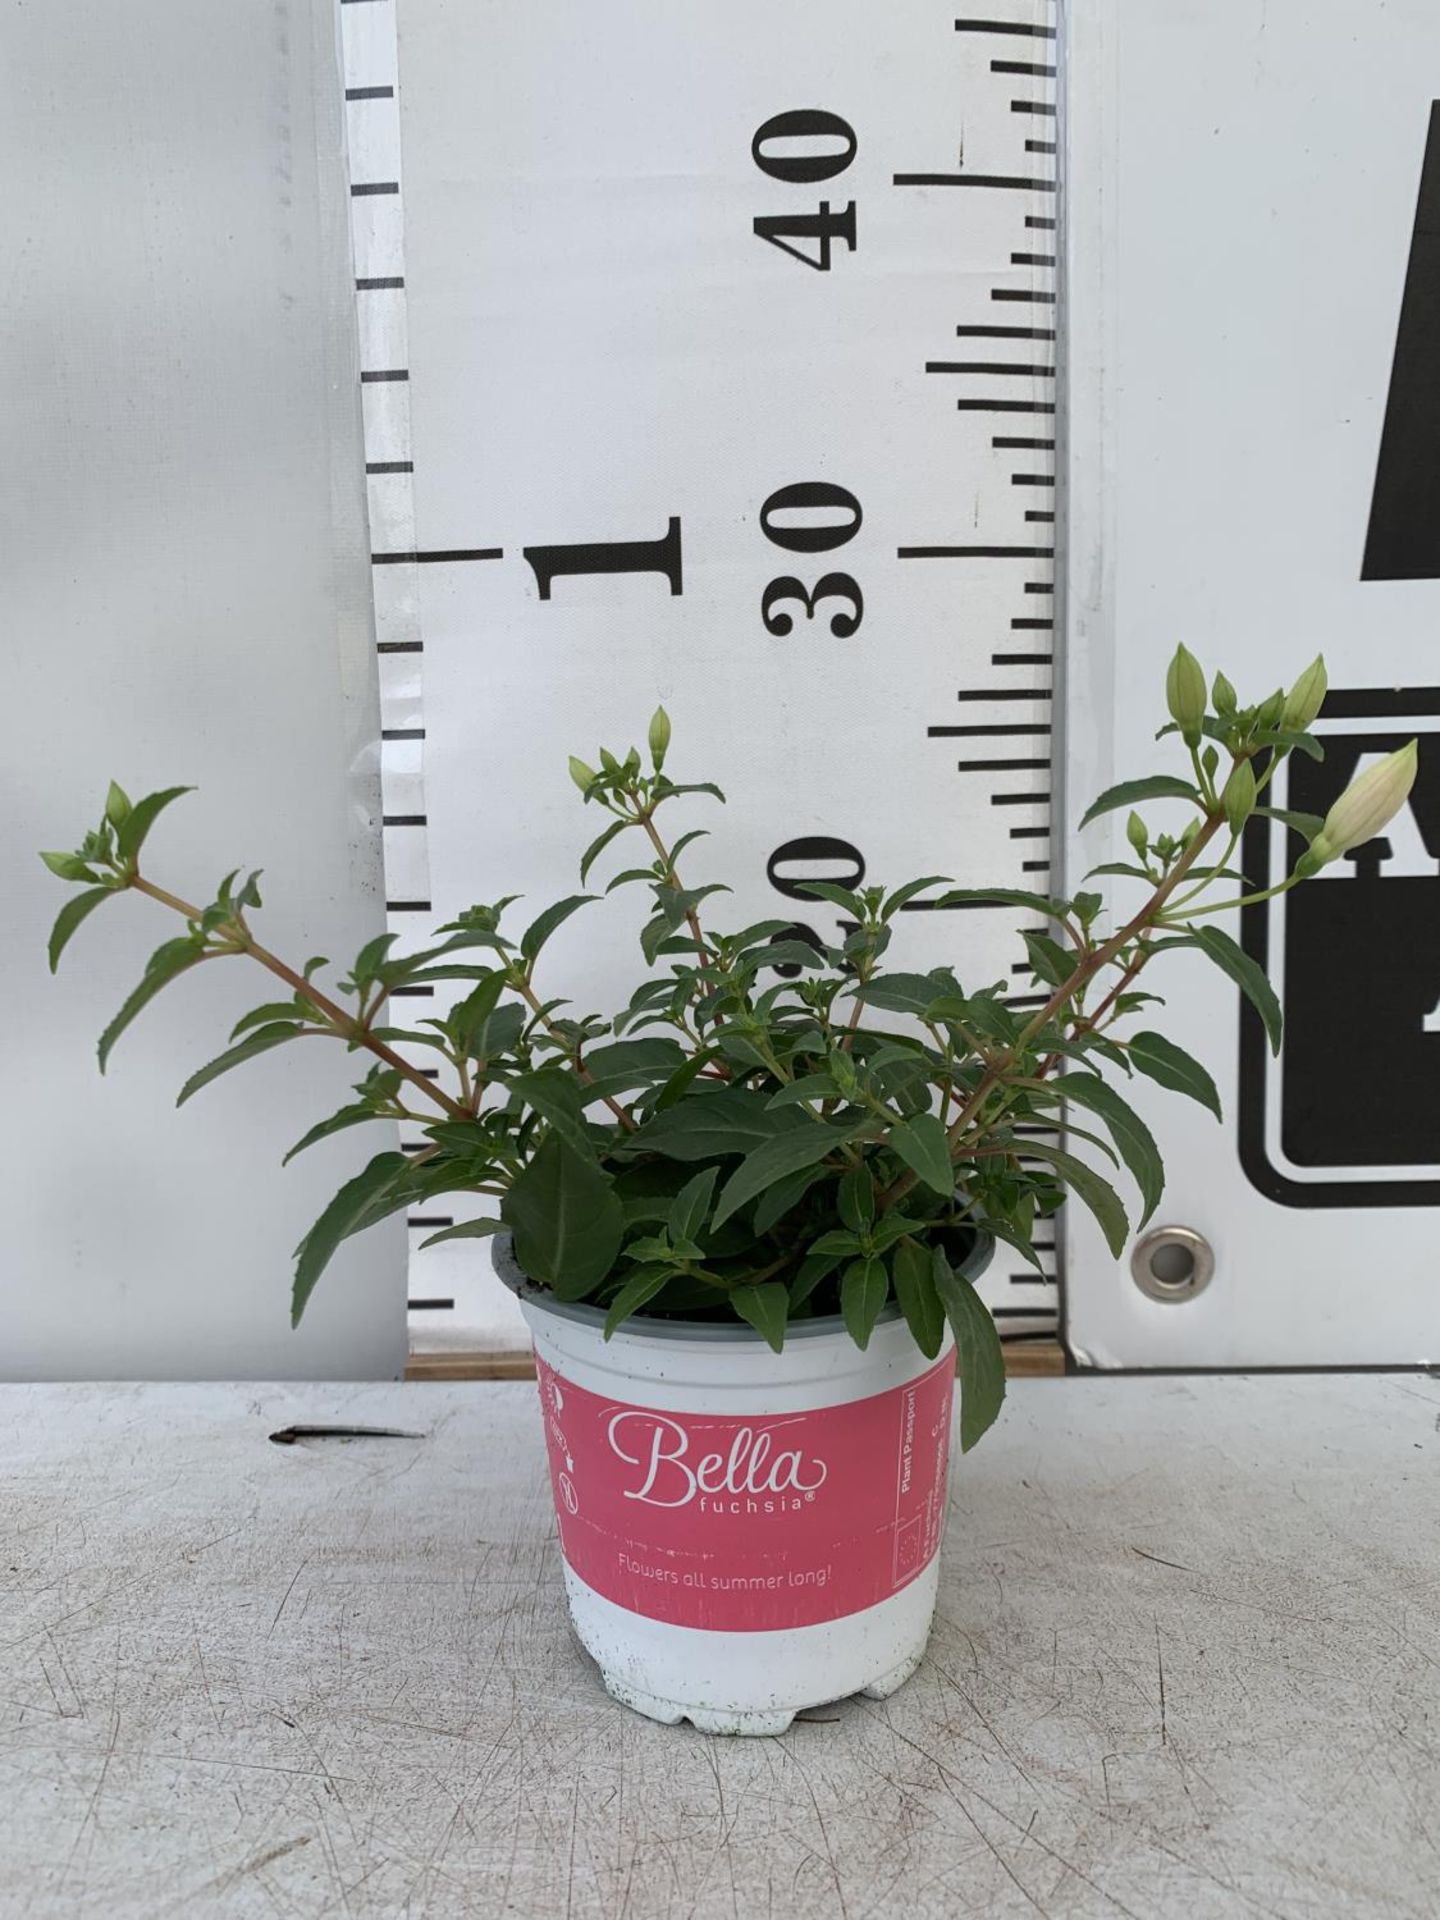 TWELVE FUCHSIA BELLA TRAILING PLANTS ON A TRAY IN P10 POTS PLUS VAT TO BE SOLD FOR THE TWELVE - Image 4 of 4